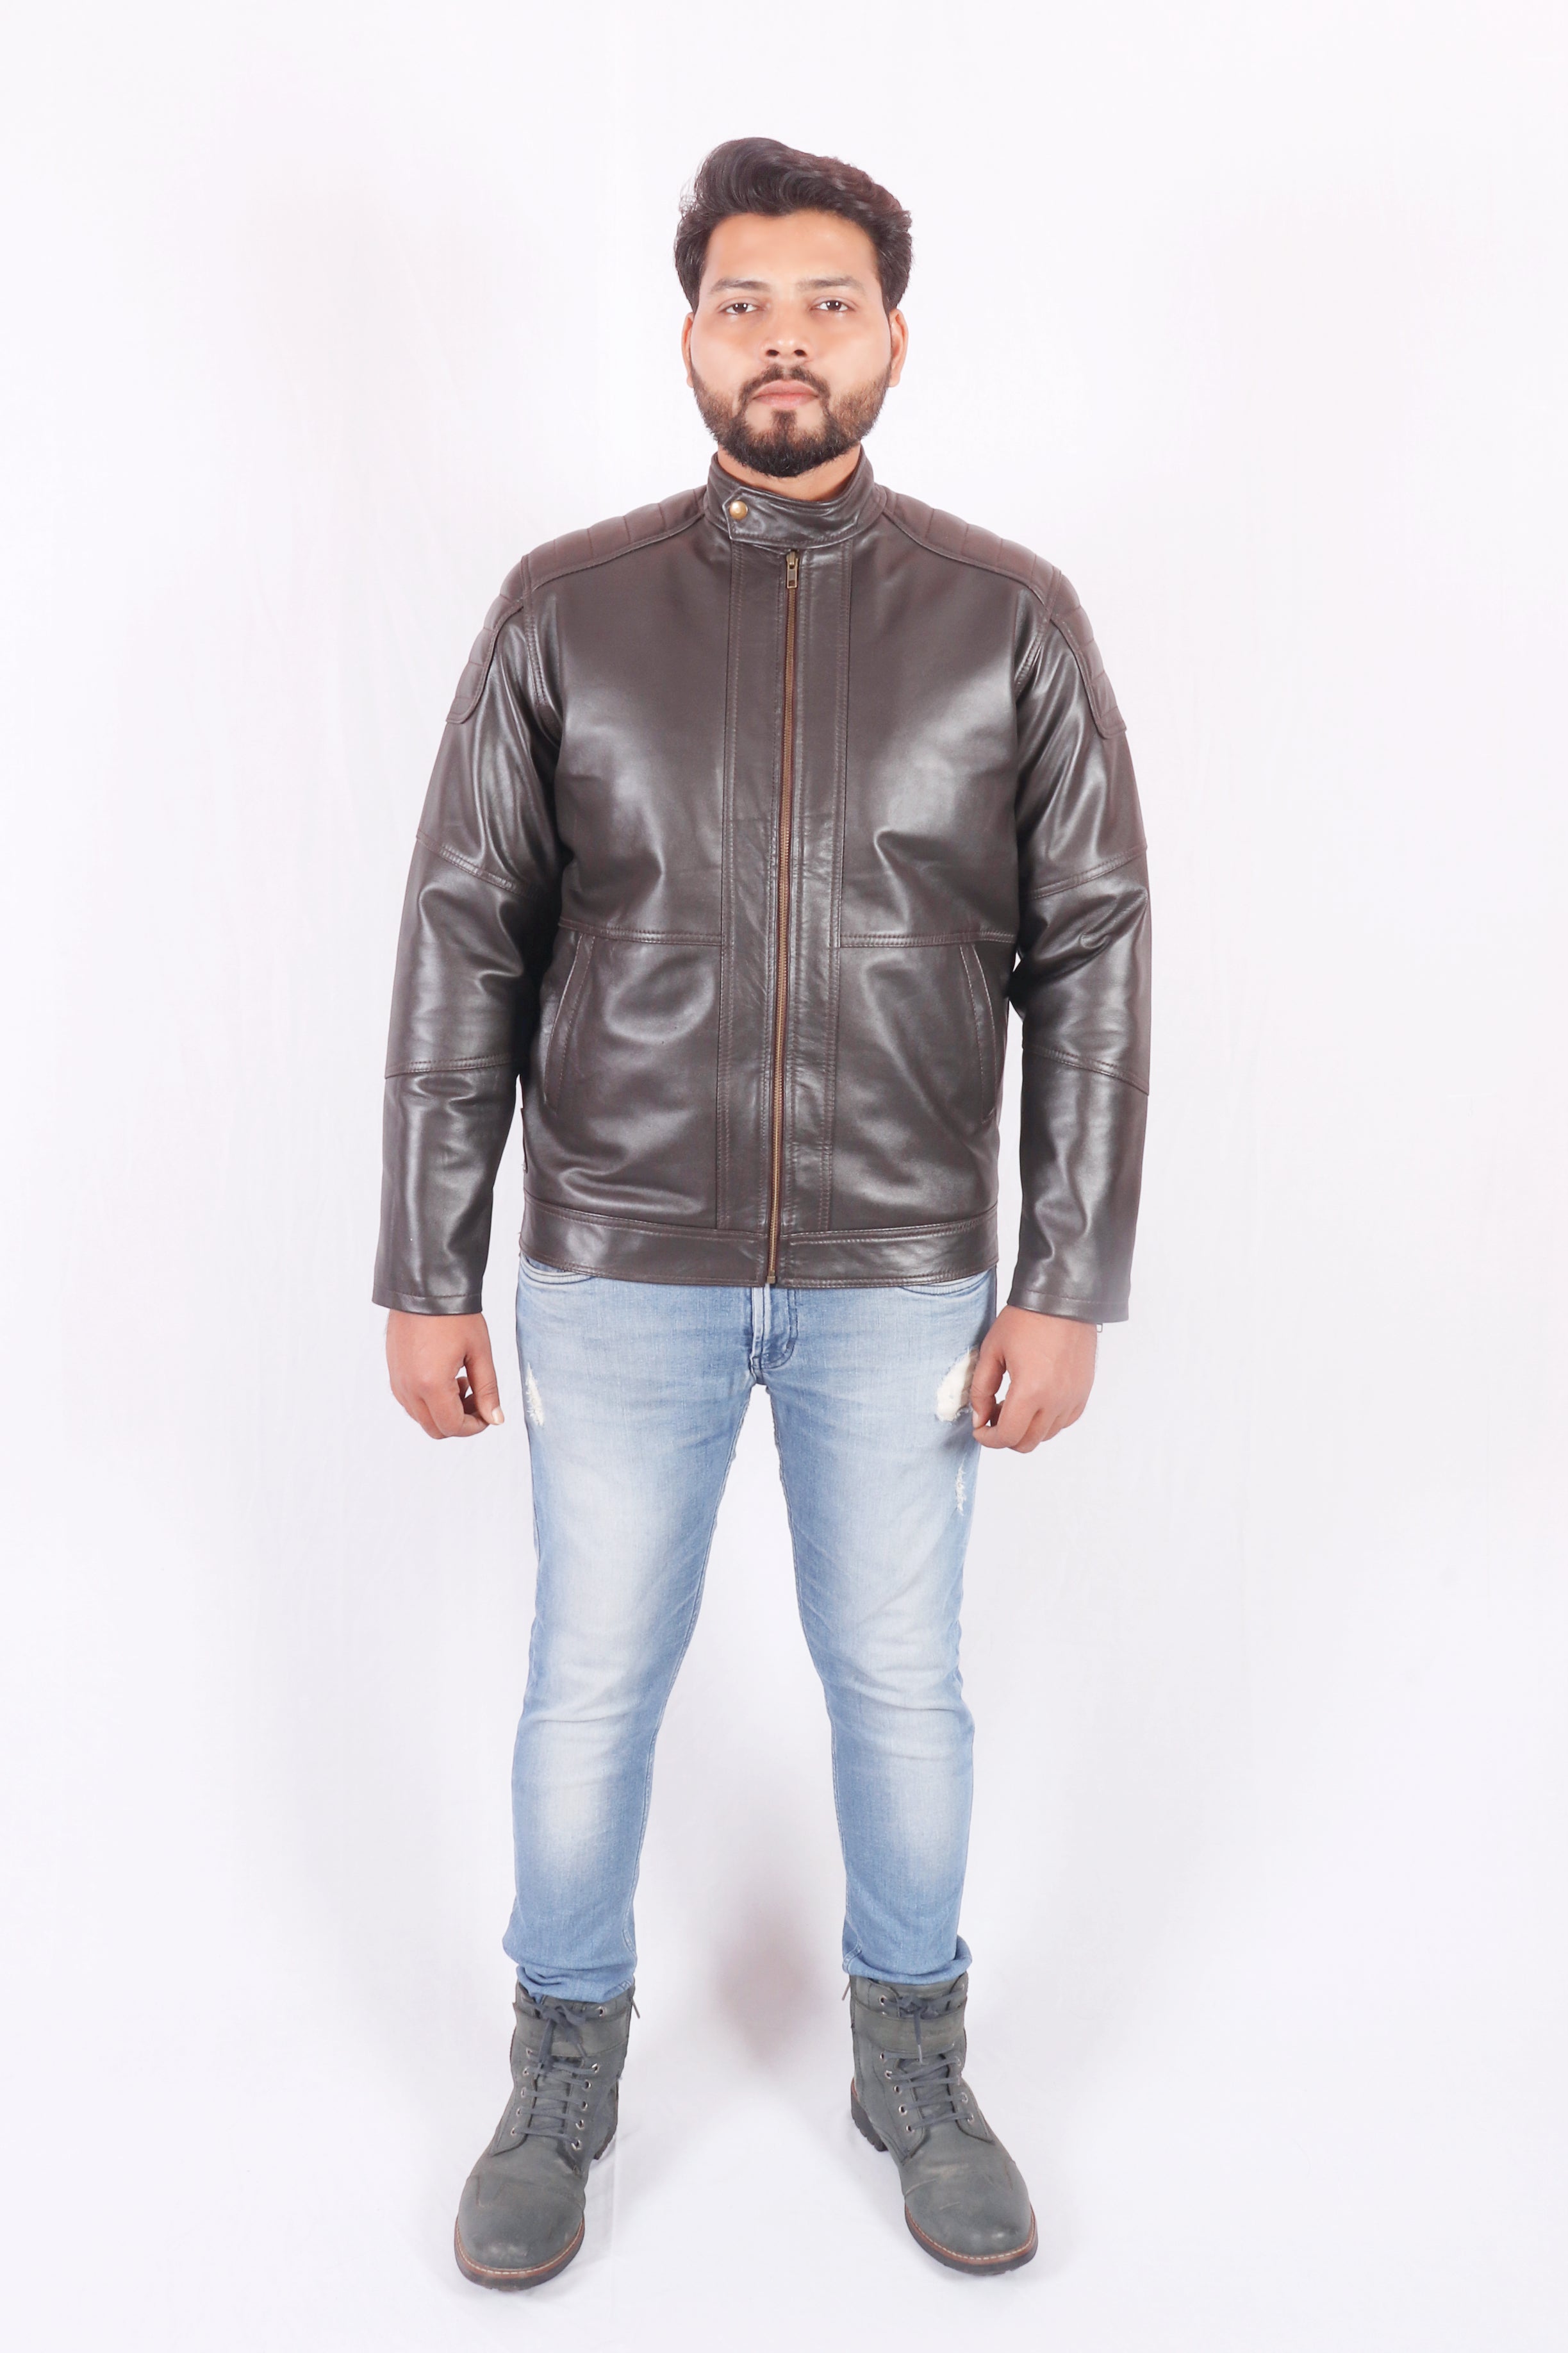 Buy fjackets Brown Leather Jacket Men - Distressed Lambskin Mens Leather  Jacket | [1100083],Johnson Brown,M at Amazon.in